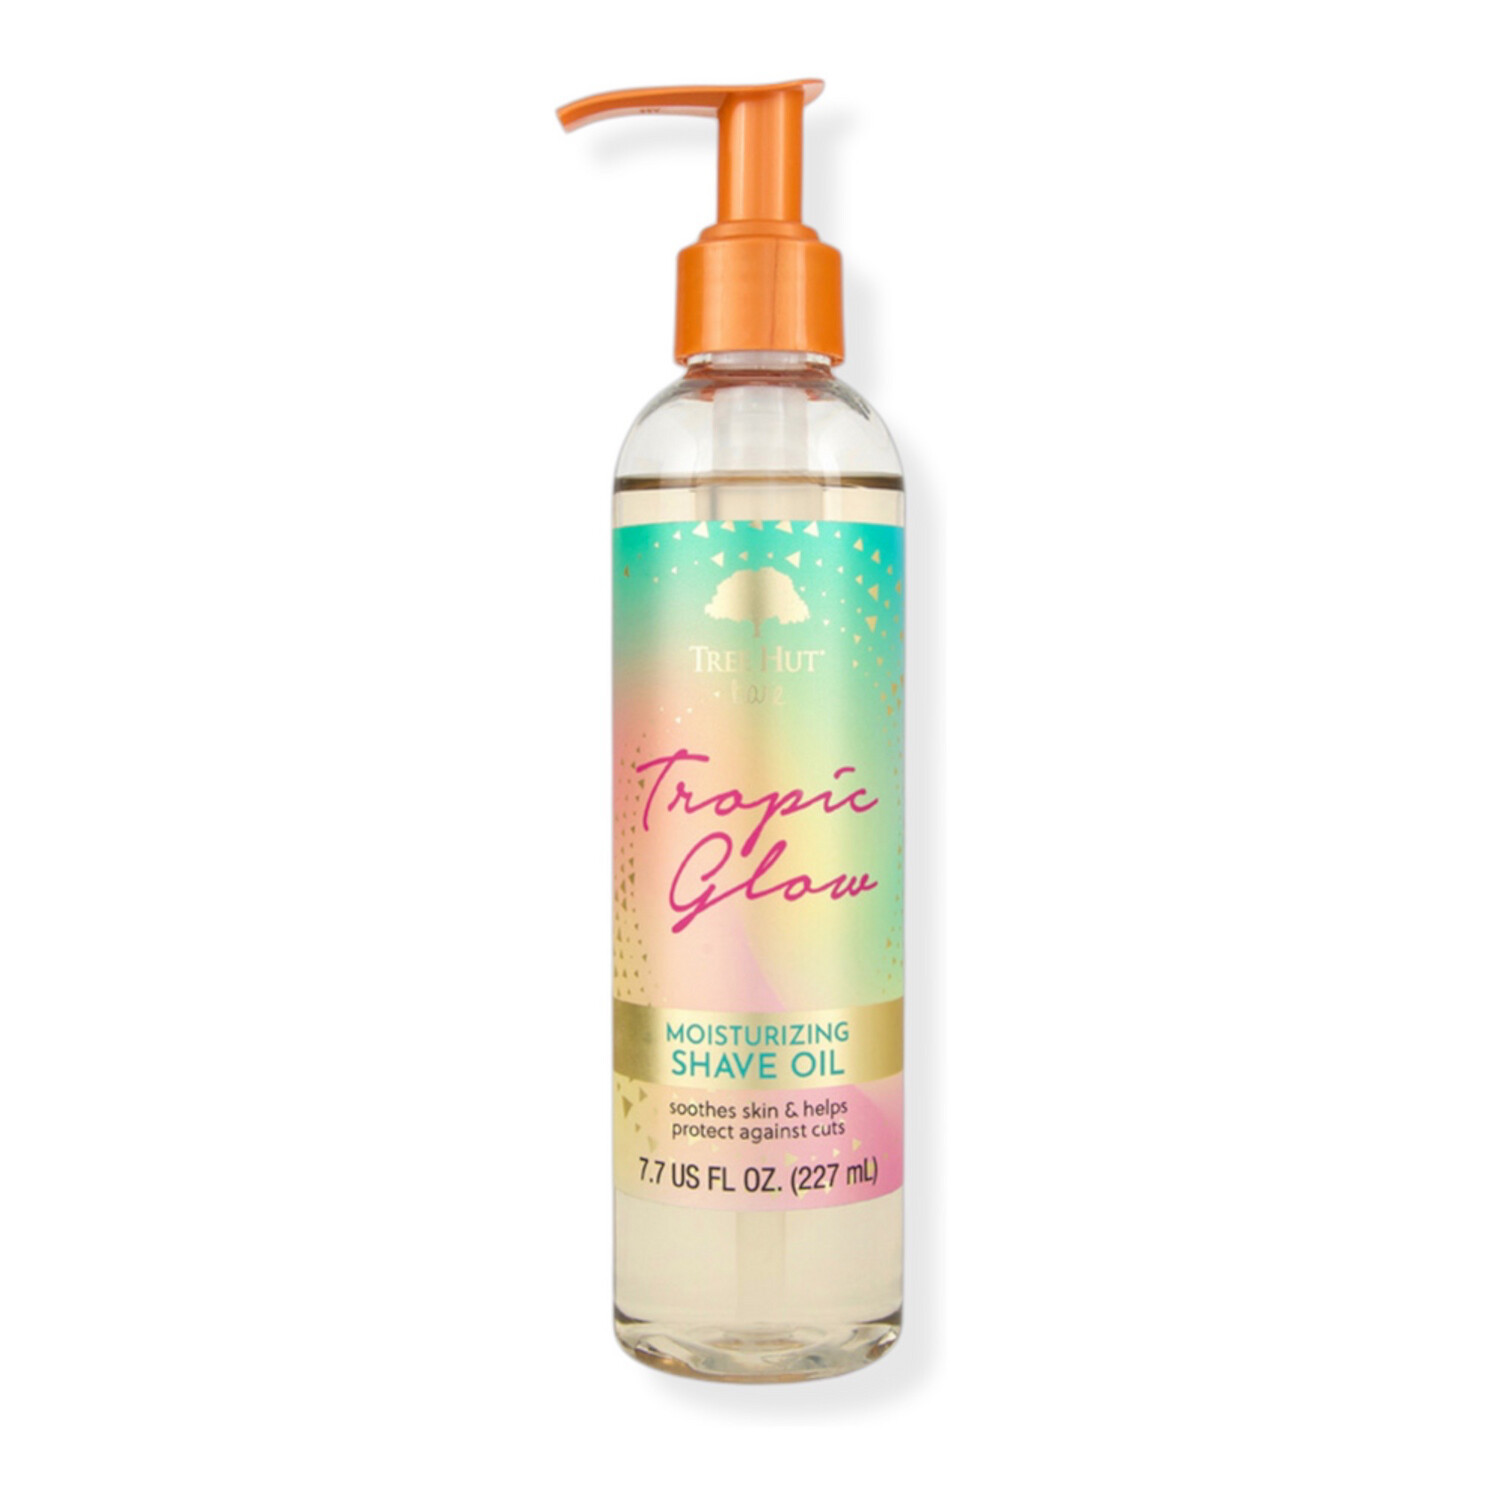 Tropic Glow Shave Oil